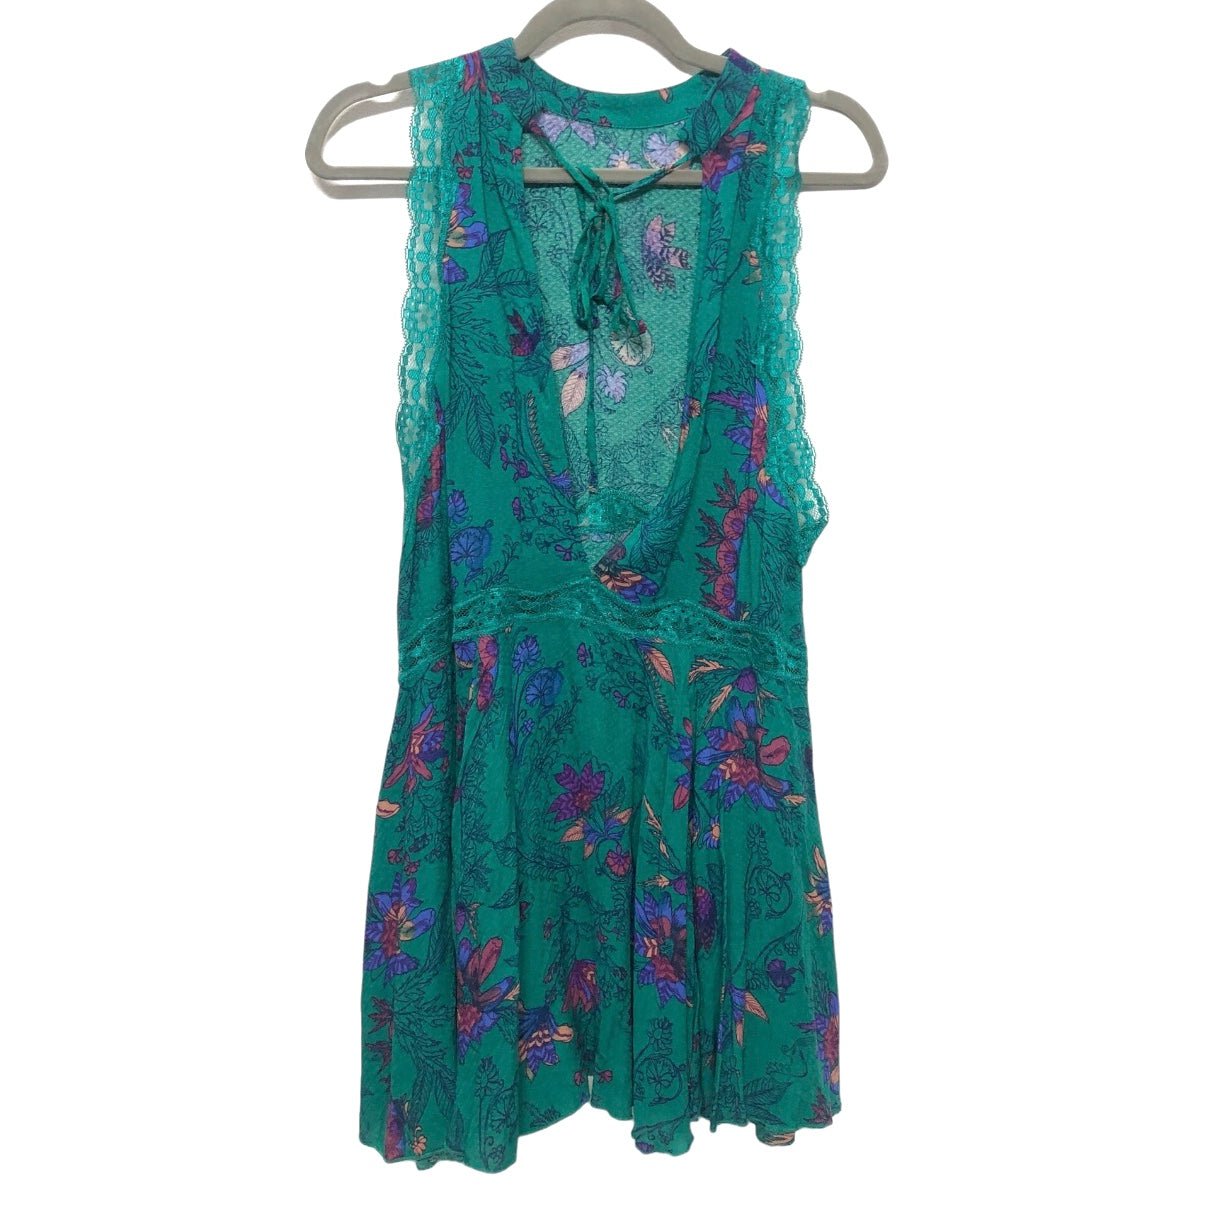 Teal Nightgown Free People, Size S